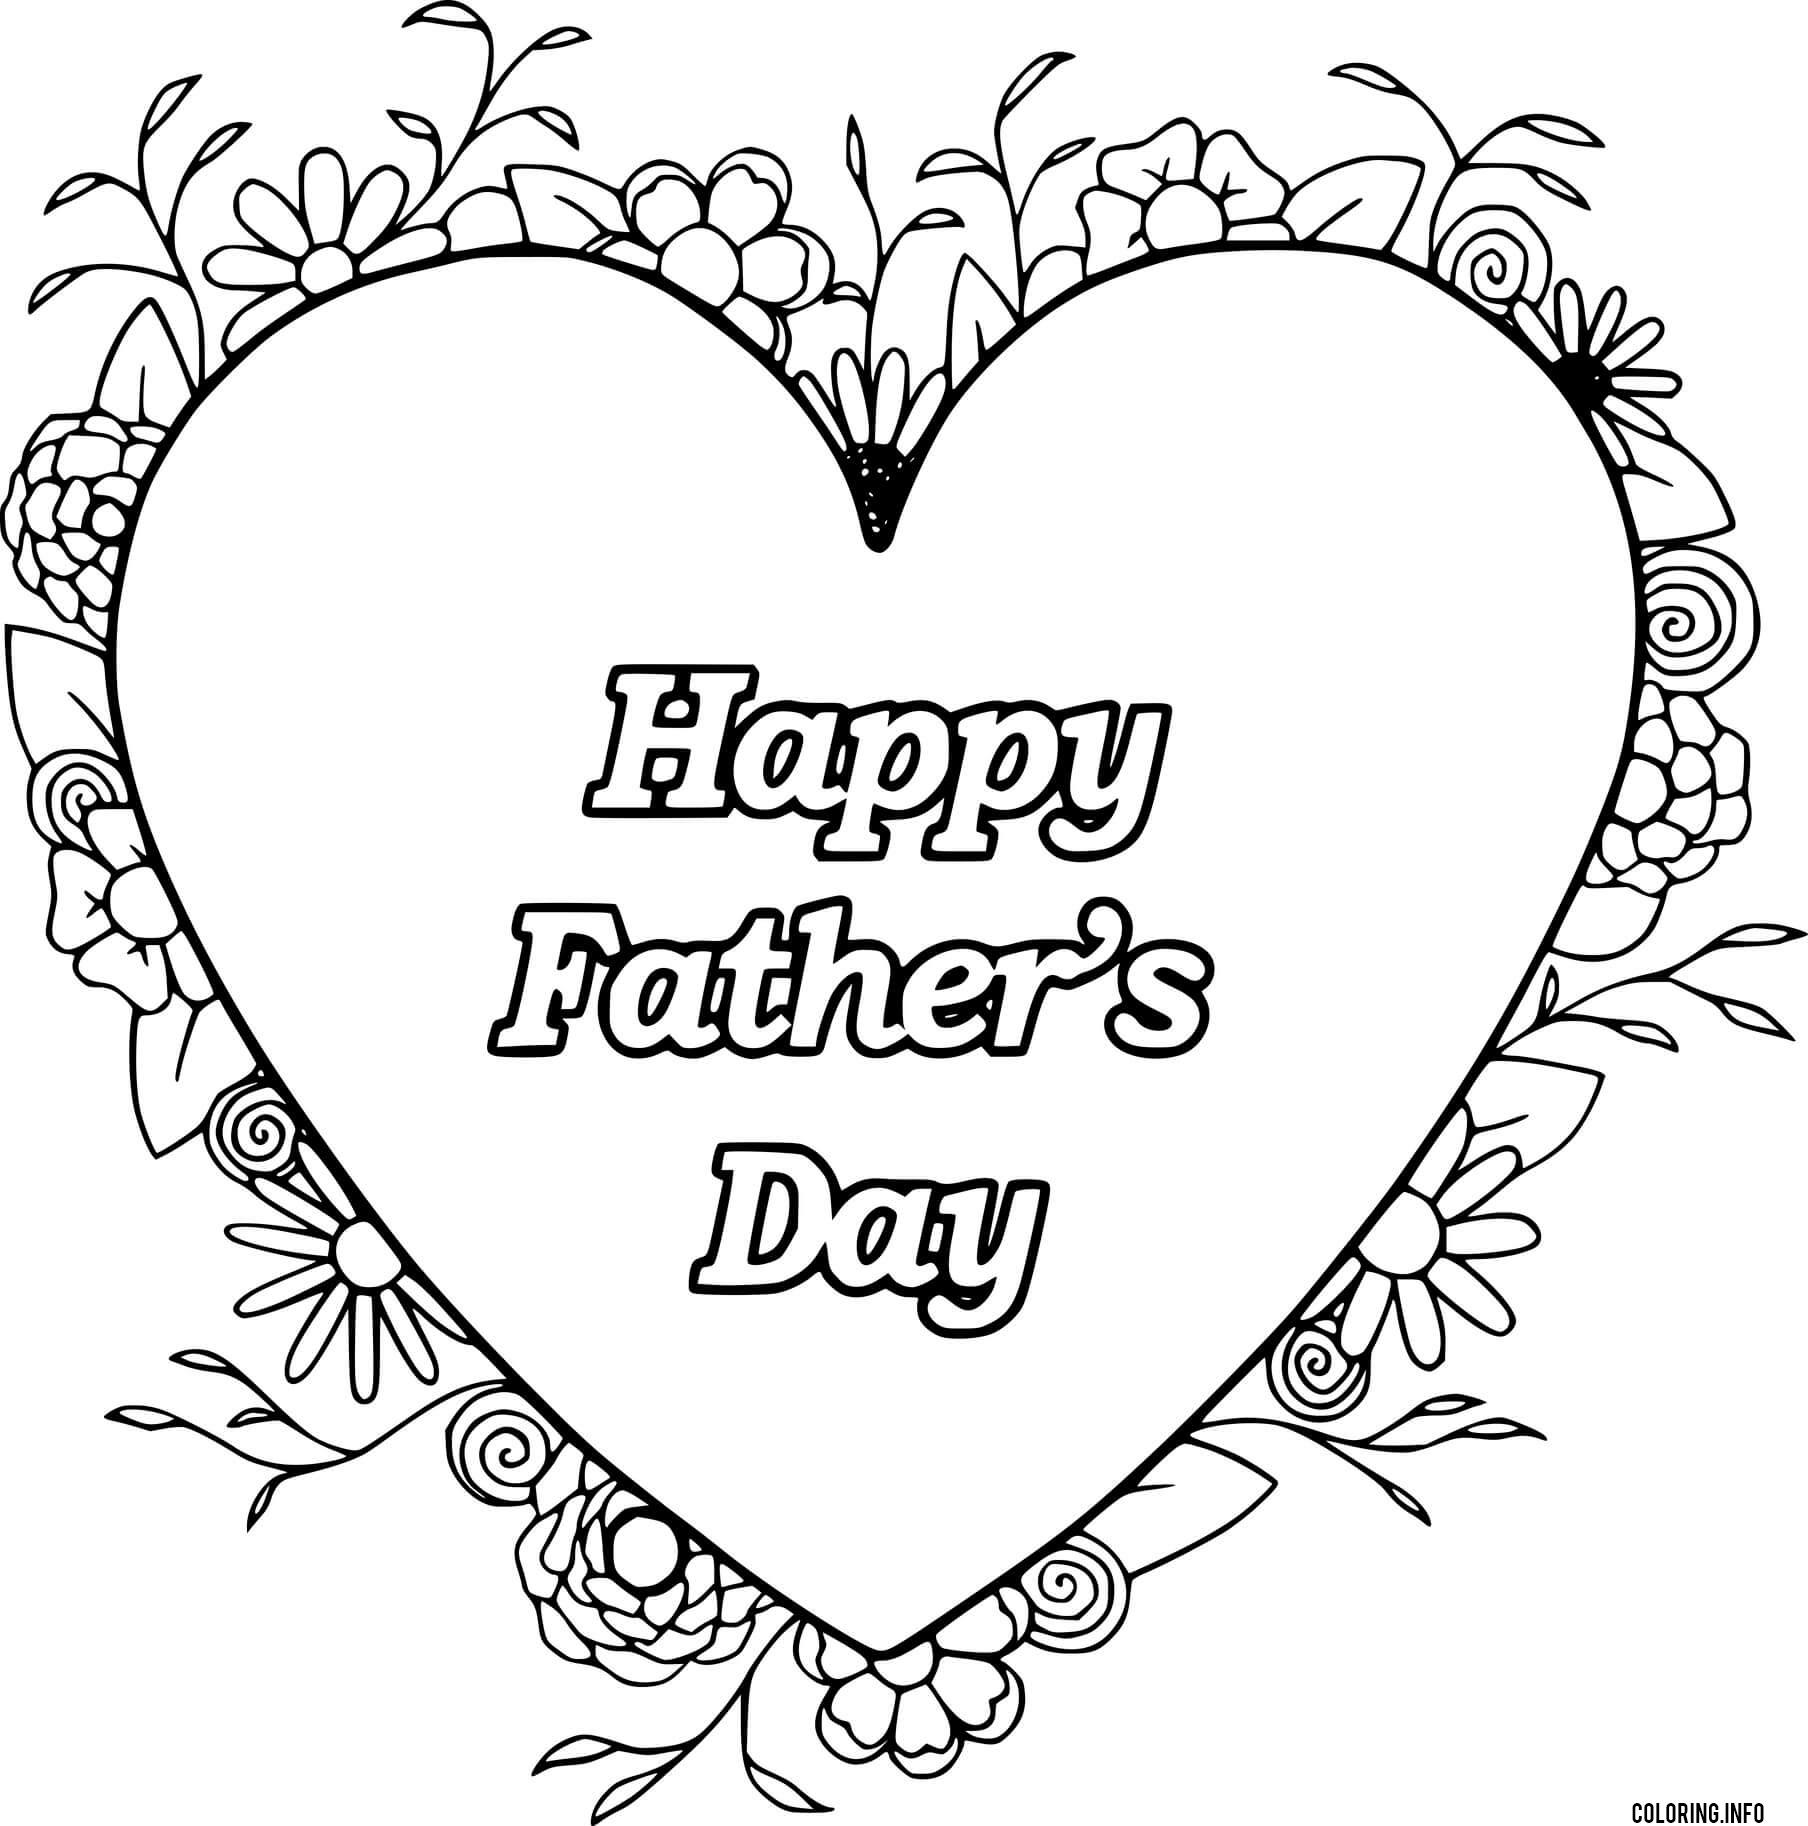 Happy Fathers Day With Heart And Flowers coloring